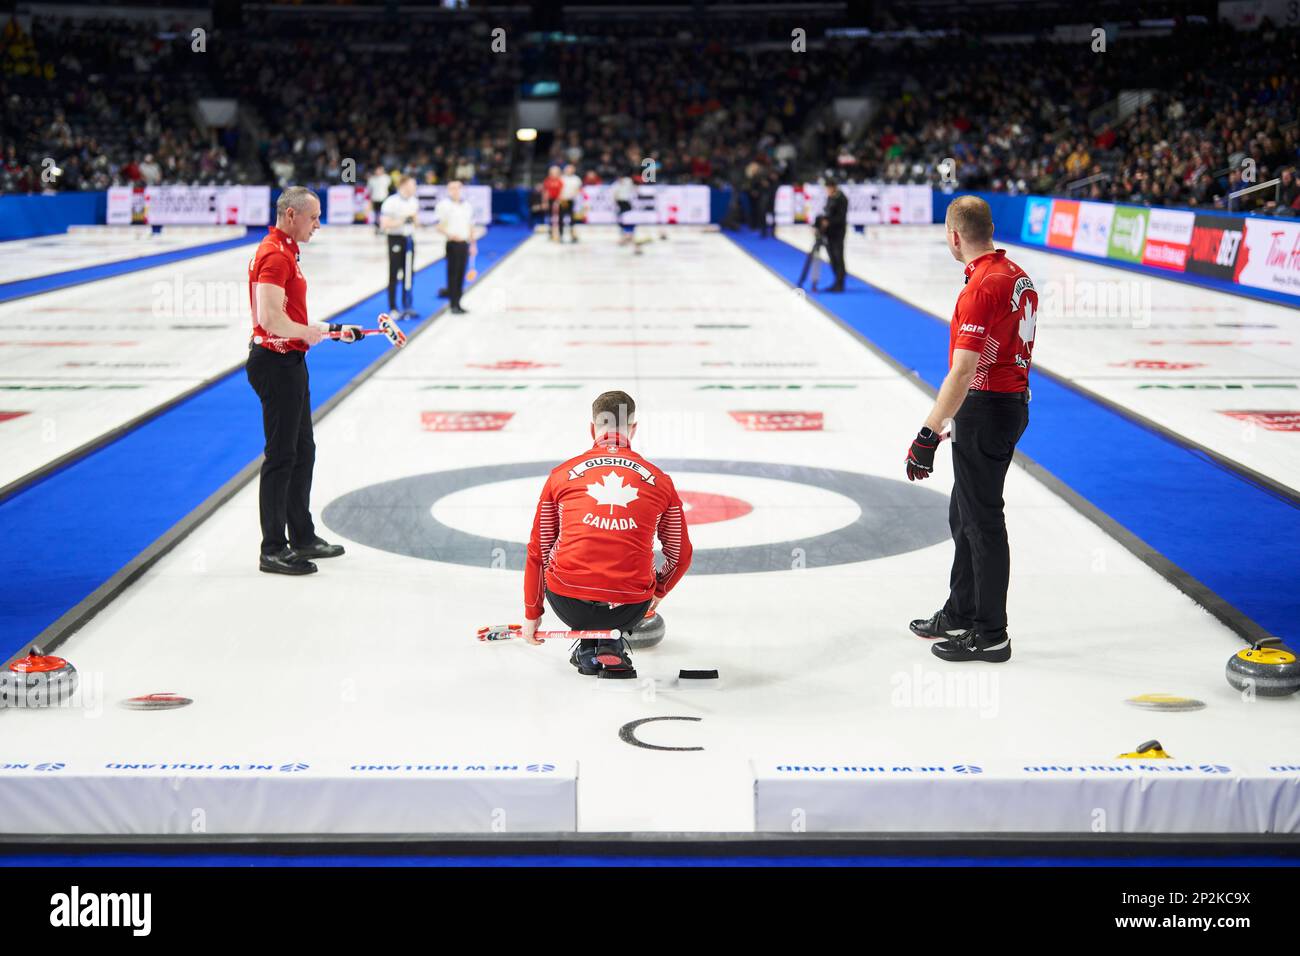 Canada skip Brad Gushue prepares to throw a stone against British Columbia at the Tim Hortons Brier curling event in London, Ontario, Saturday, March 4, 2023